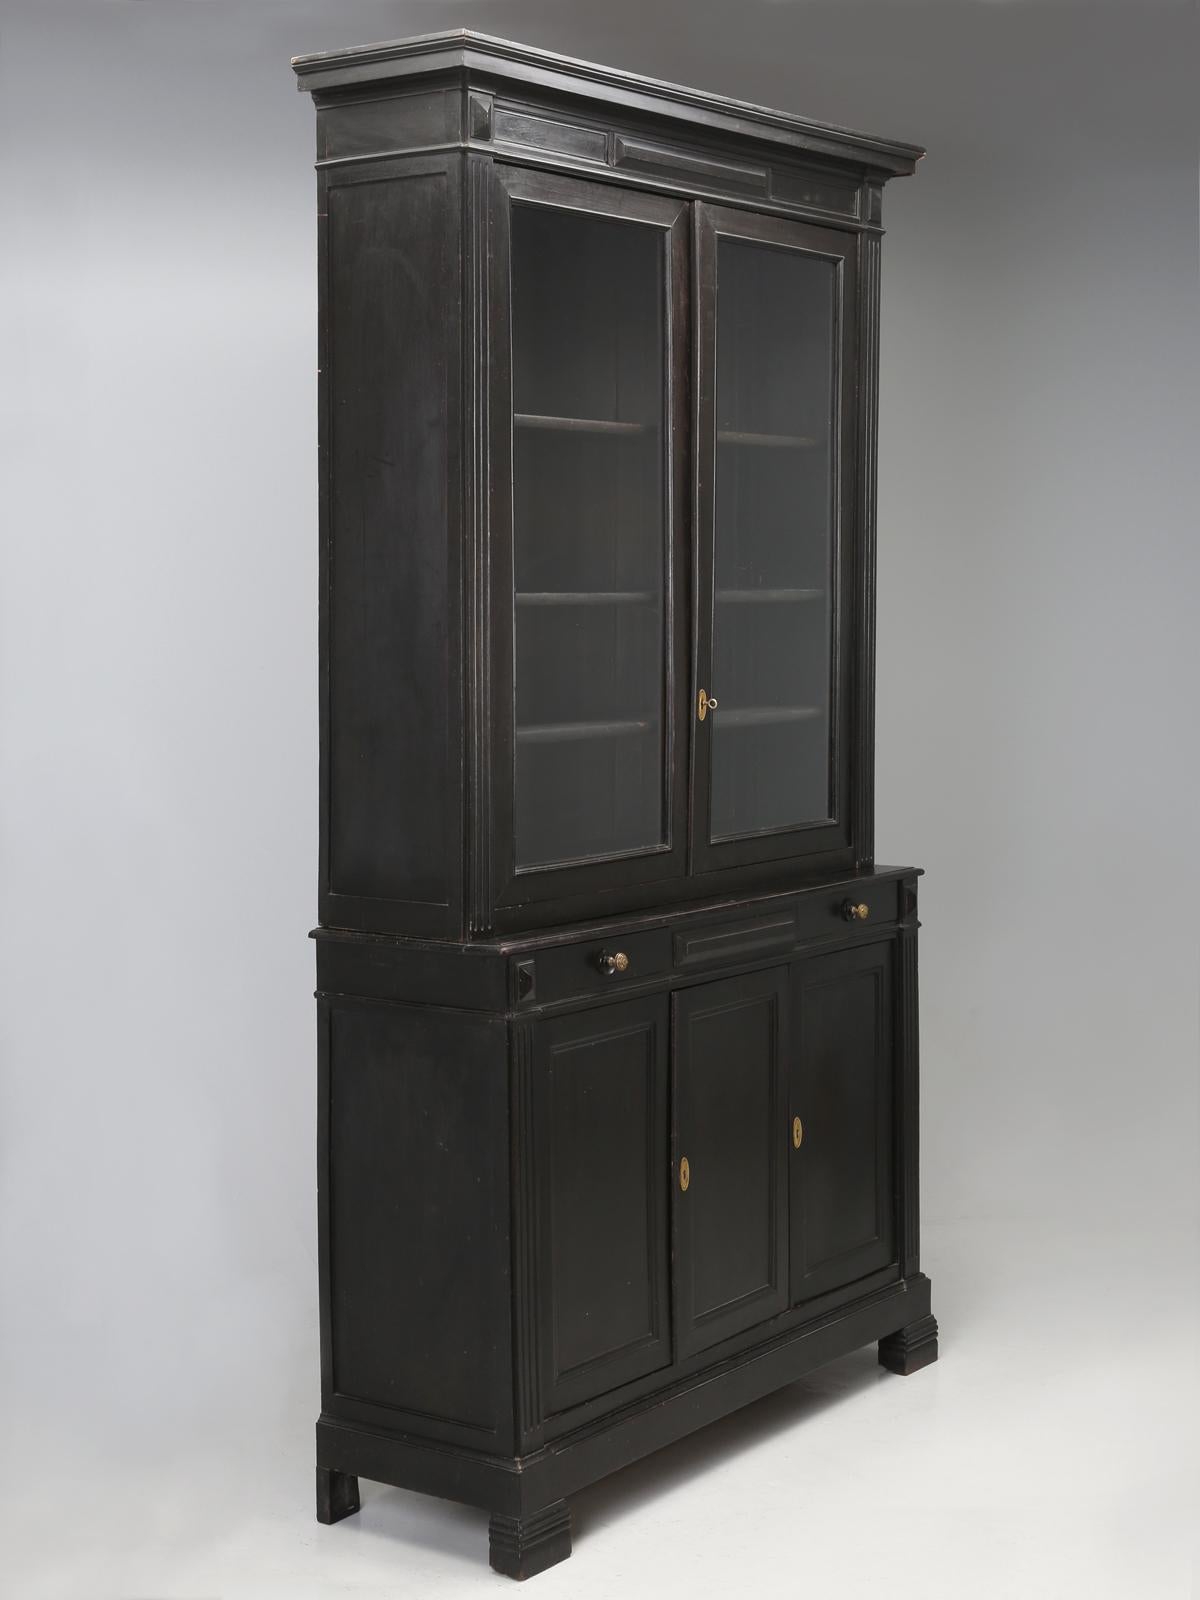 An original ebonized bookcase, bibliotheque, display or china cabinet and by the word original, we are referencing, that this is not a newly doctored up antique French black cabinet, painted to look ebonized, but rather, a 100%, untouched, all